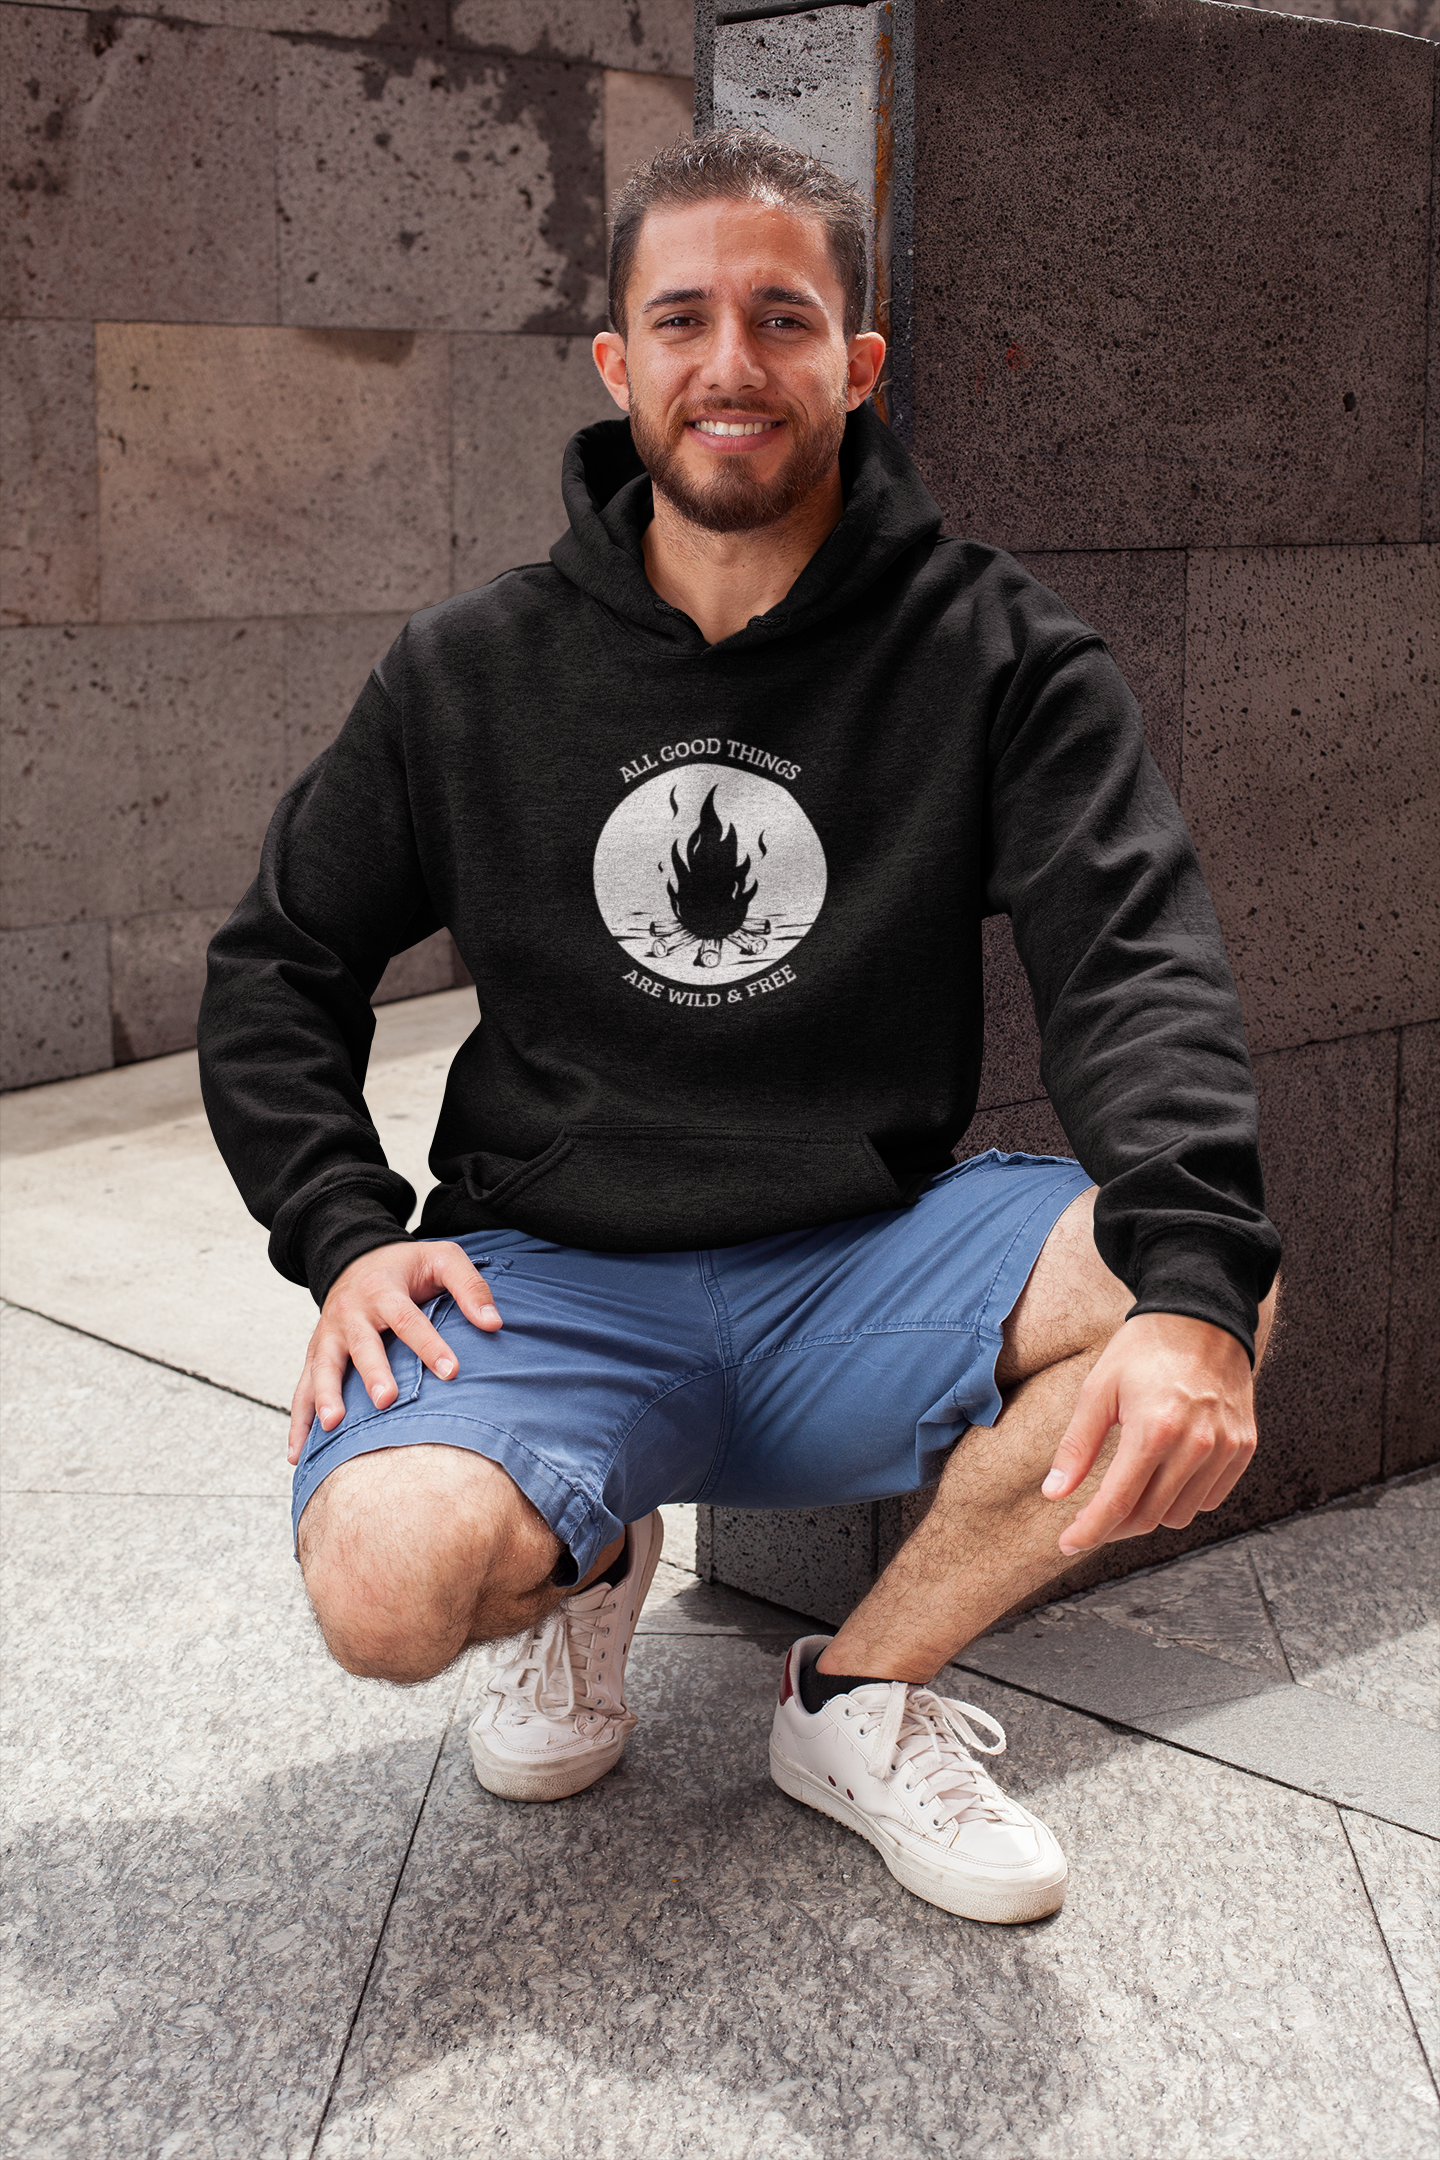 All Good Things Are Wild & Free Men's Travel Hoodie